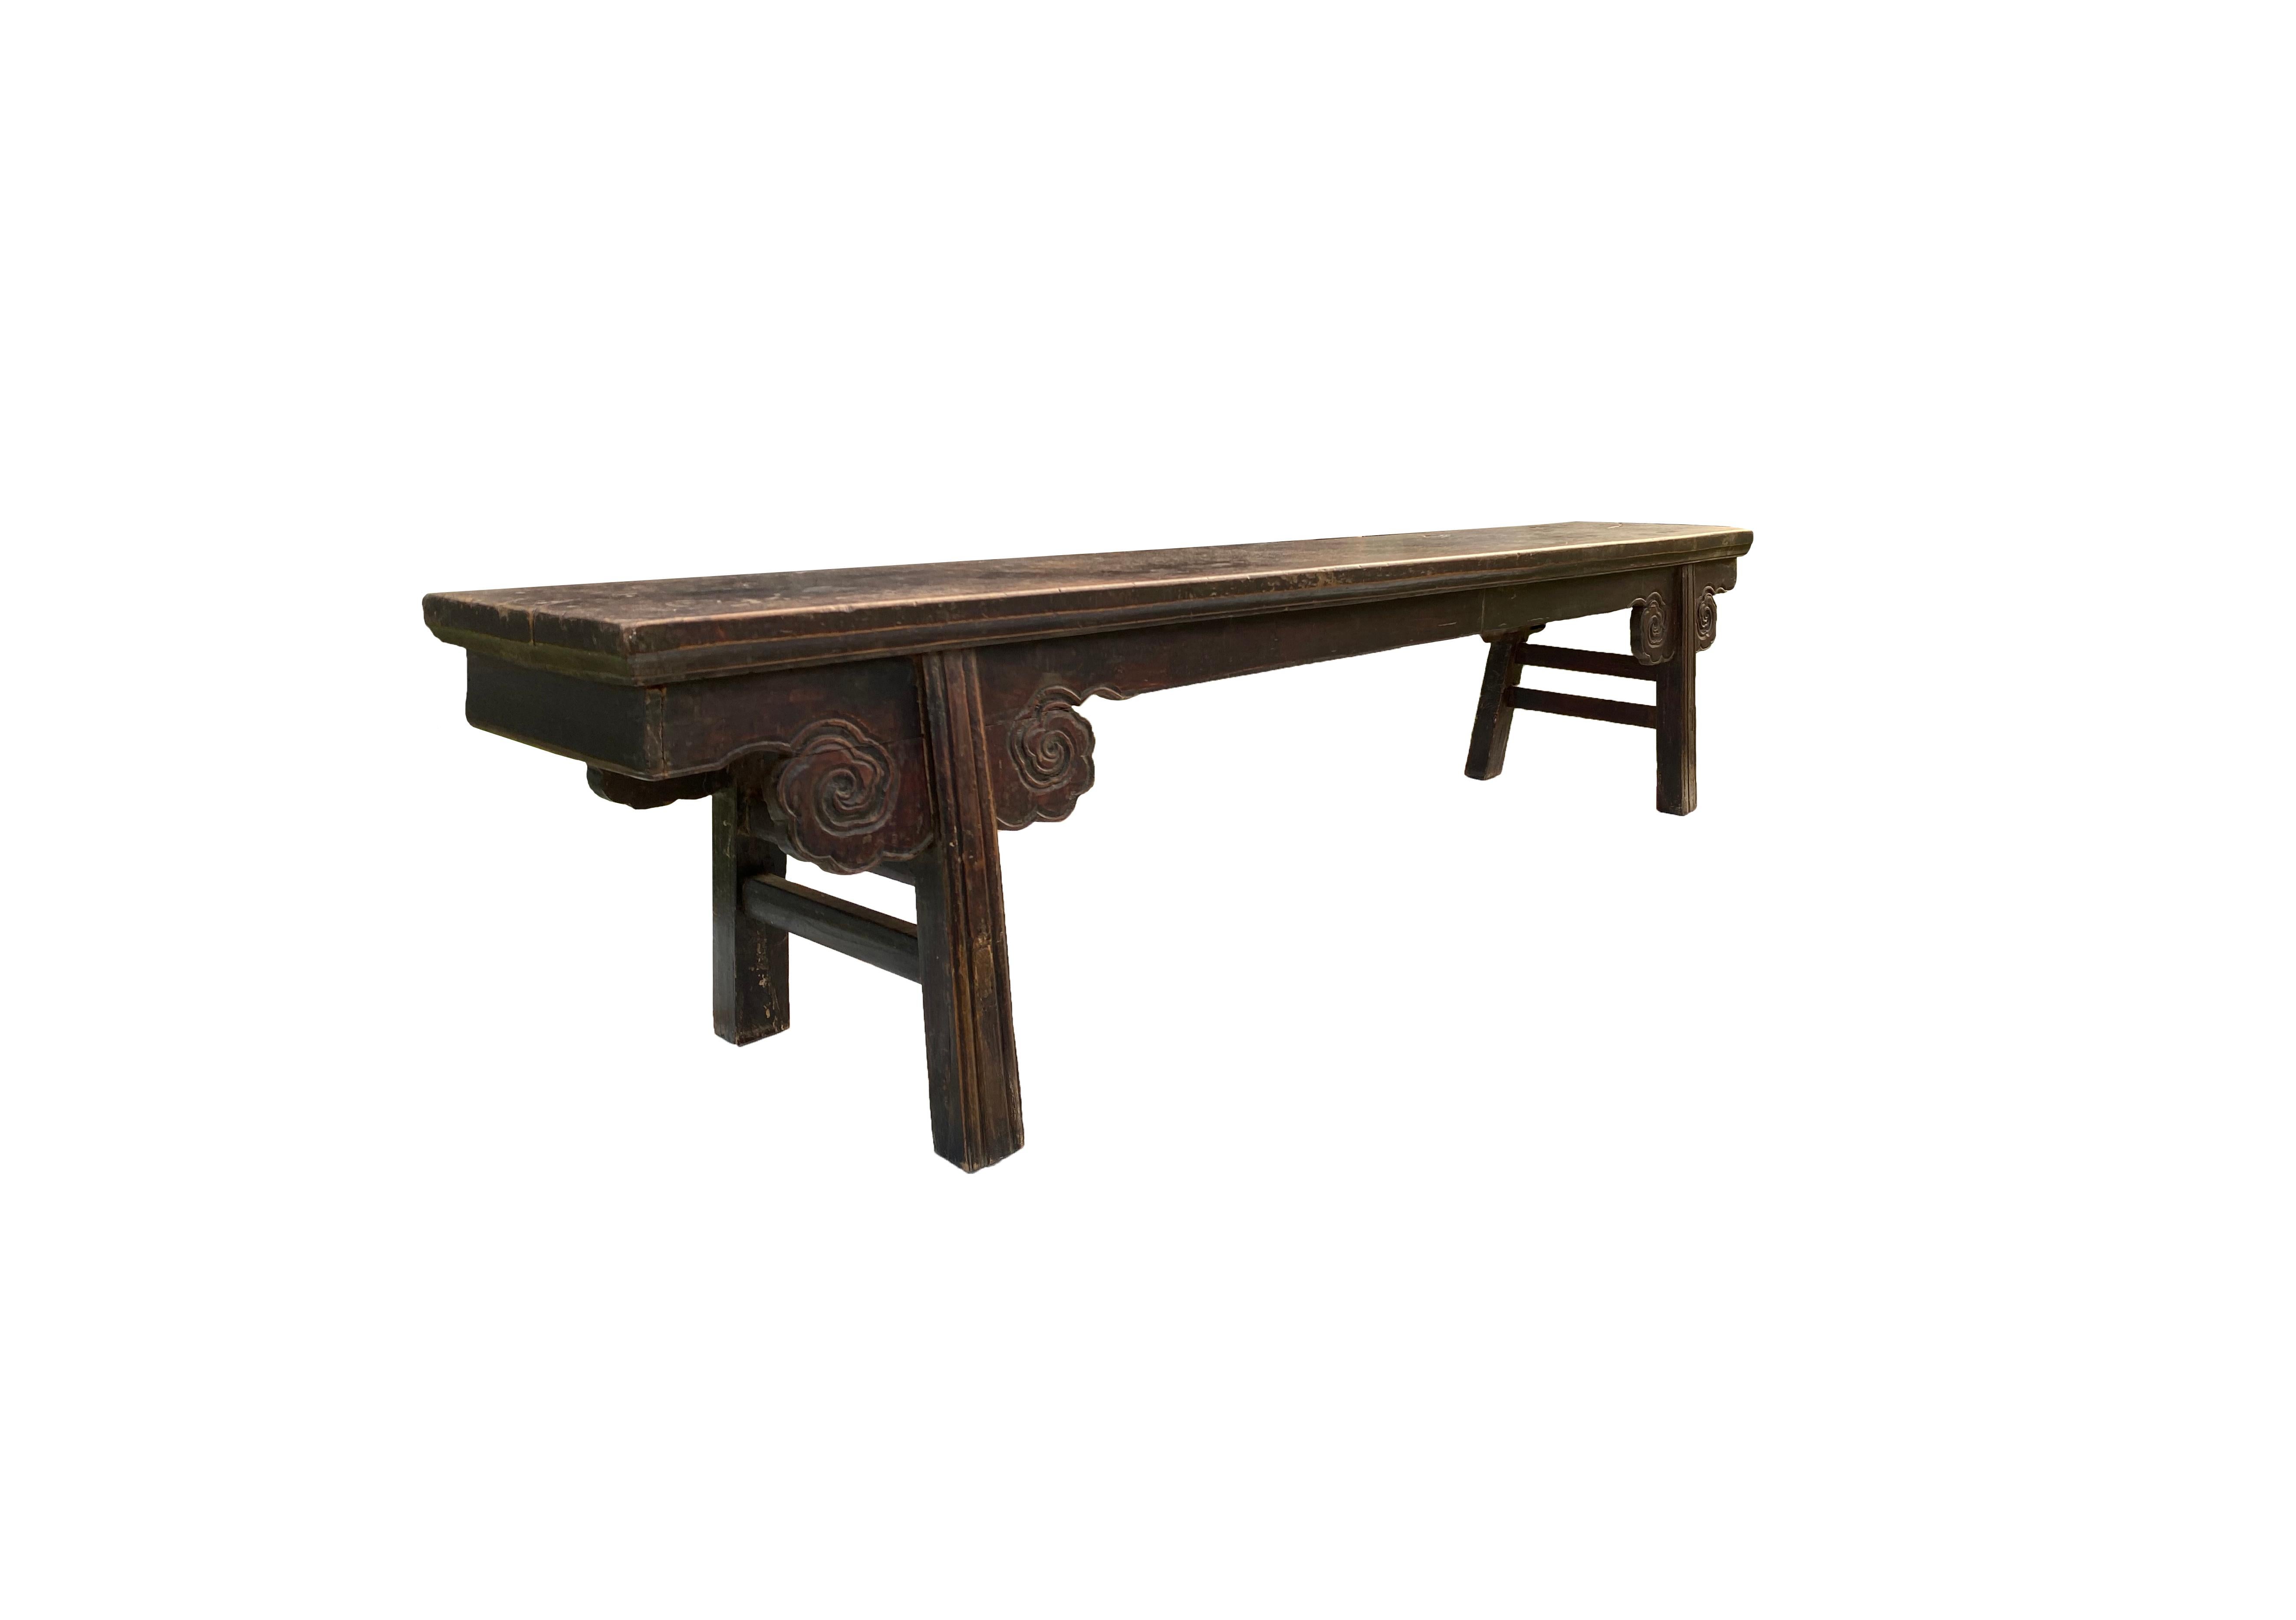 This Chinese cloud pattern long Bench from the Qing Dynasty features wonderfully carved cloud spandrels, straight legs with double stretchers and a solid top. It features a more than centuries old lacquer finish and age related patina and textures.